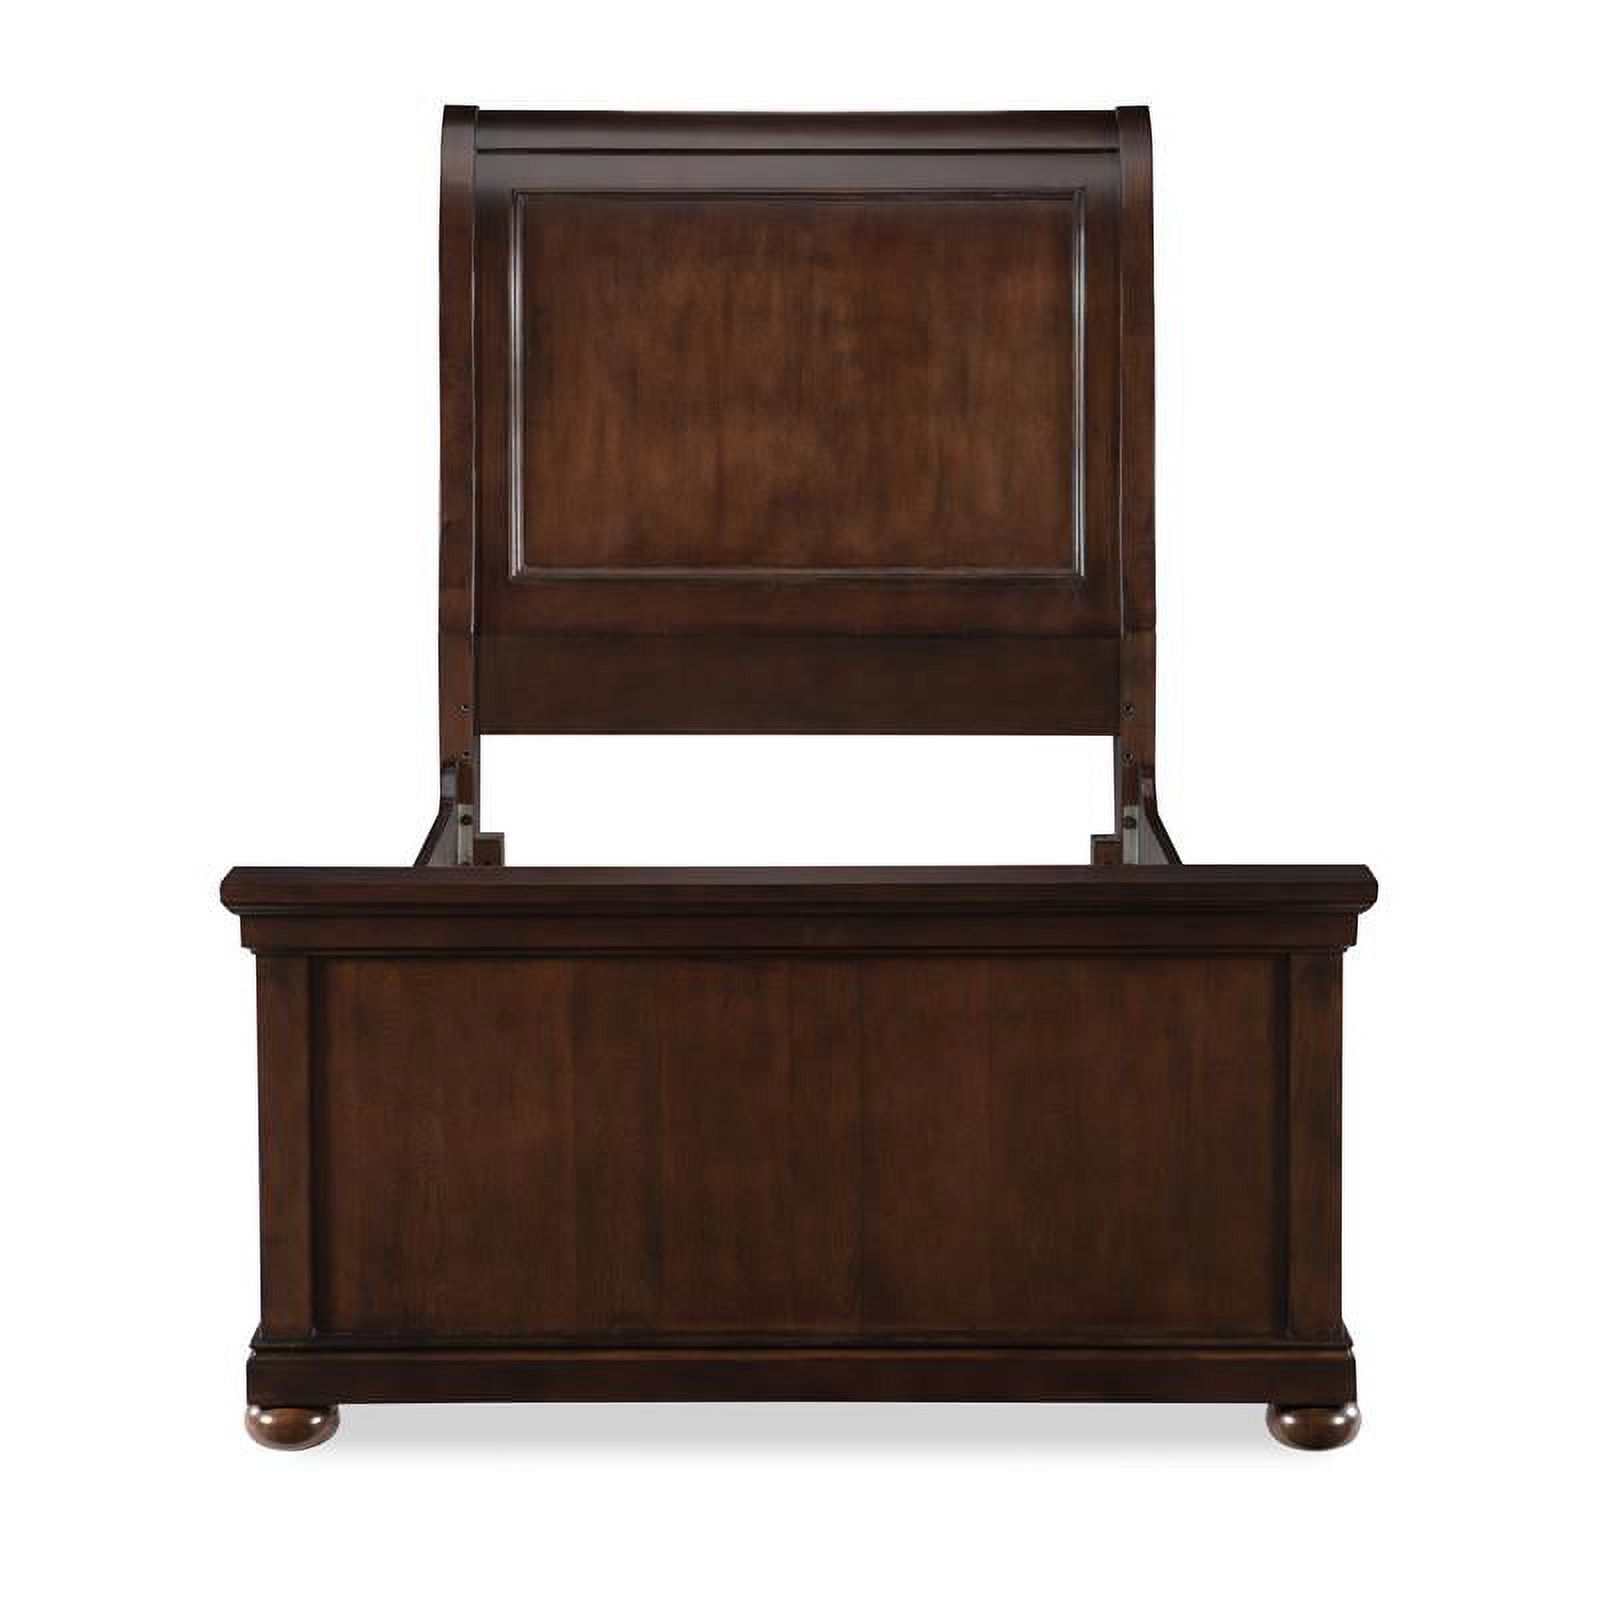 Legacy Classic Classic Canterbury Twin Sleigh Bed in Warm Cherry Finish Wood - image 3 of 4